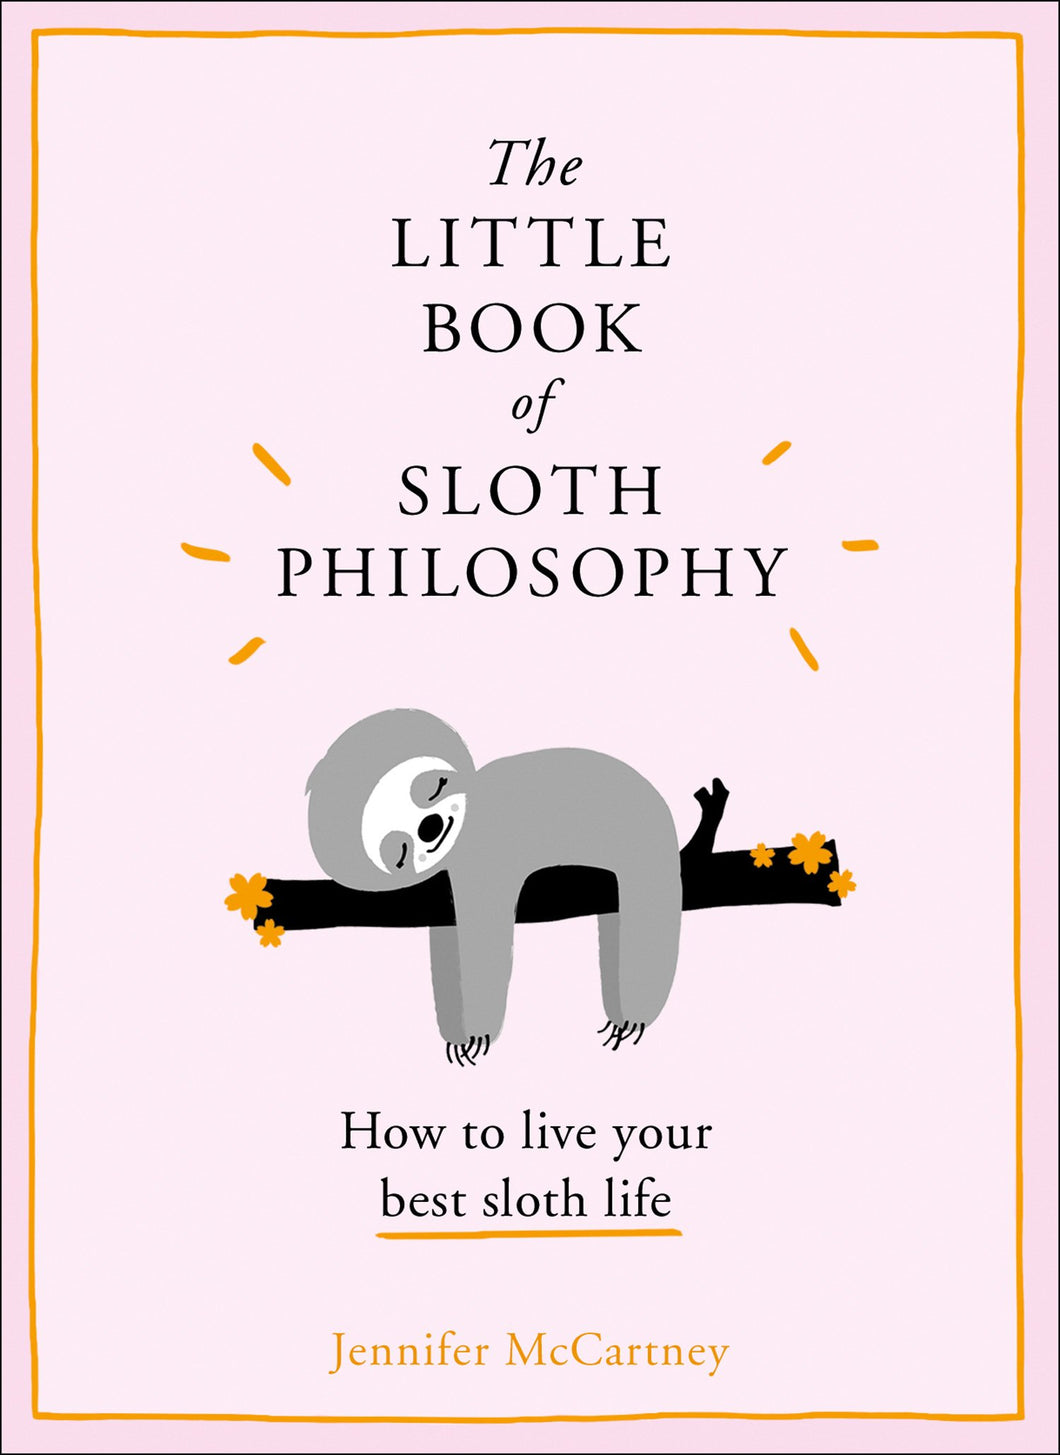 The Little Book of Sloth Philosophy: How to live your best sloth life